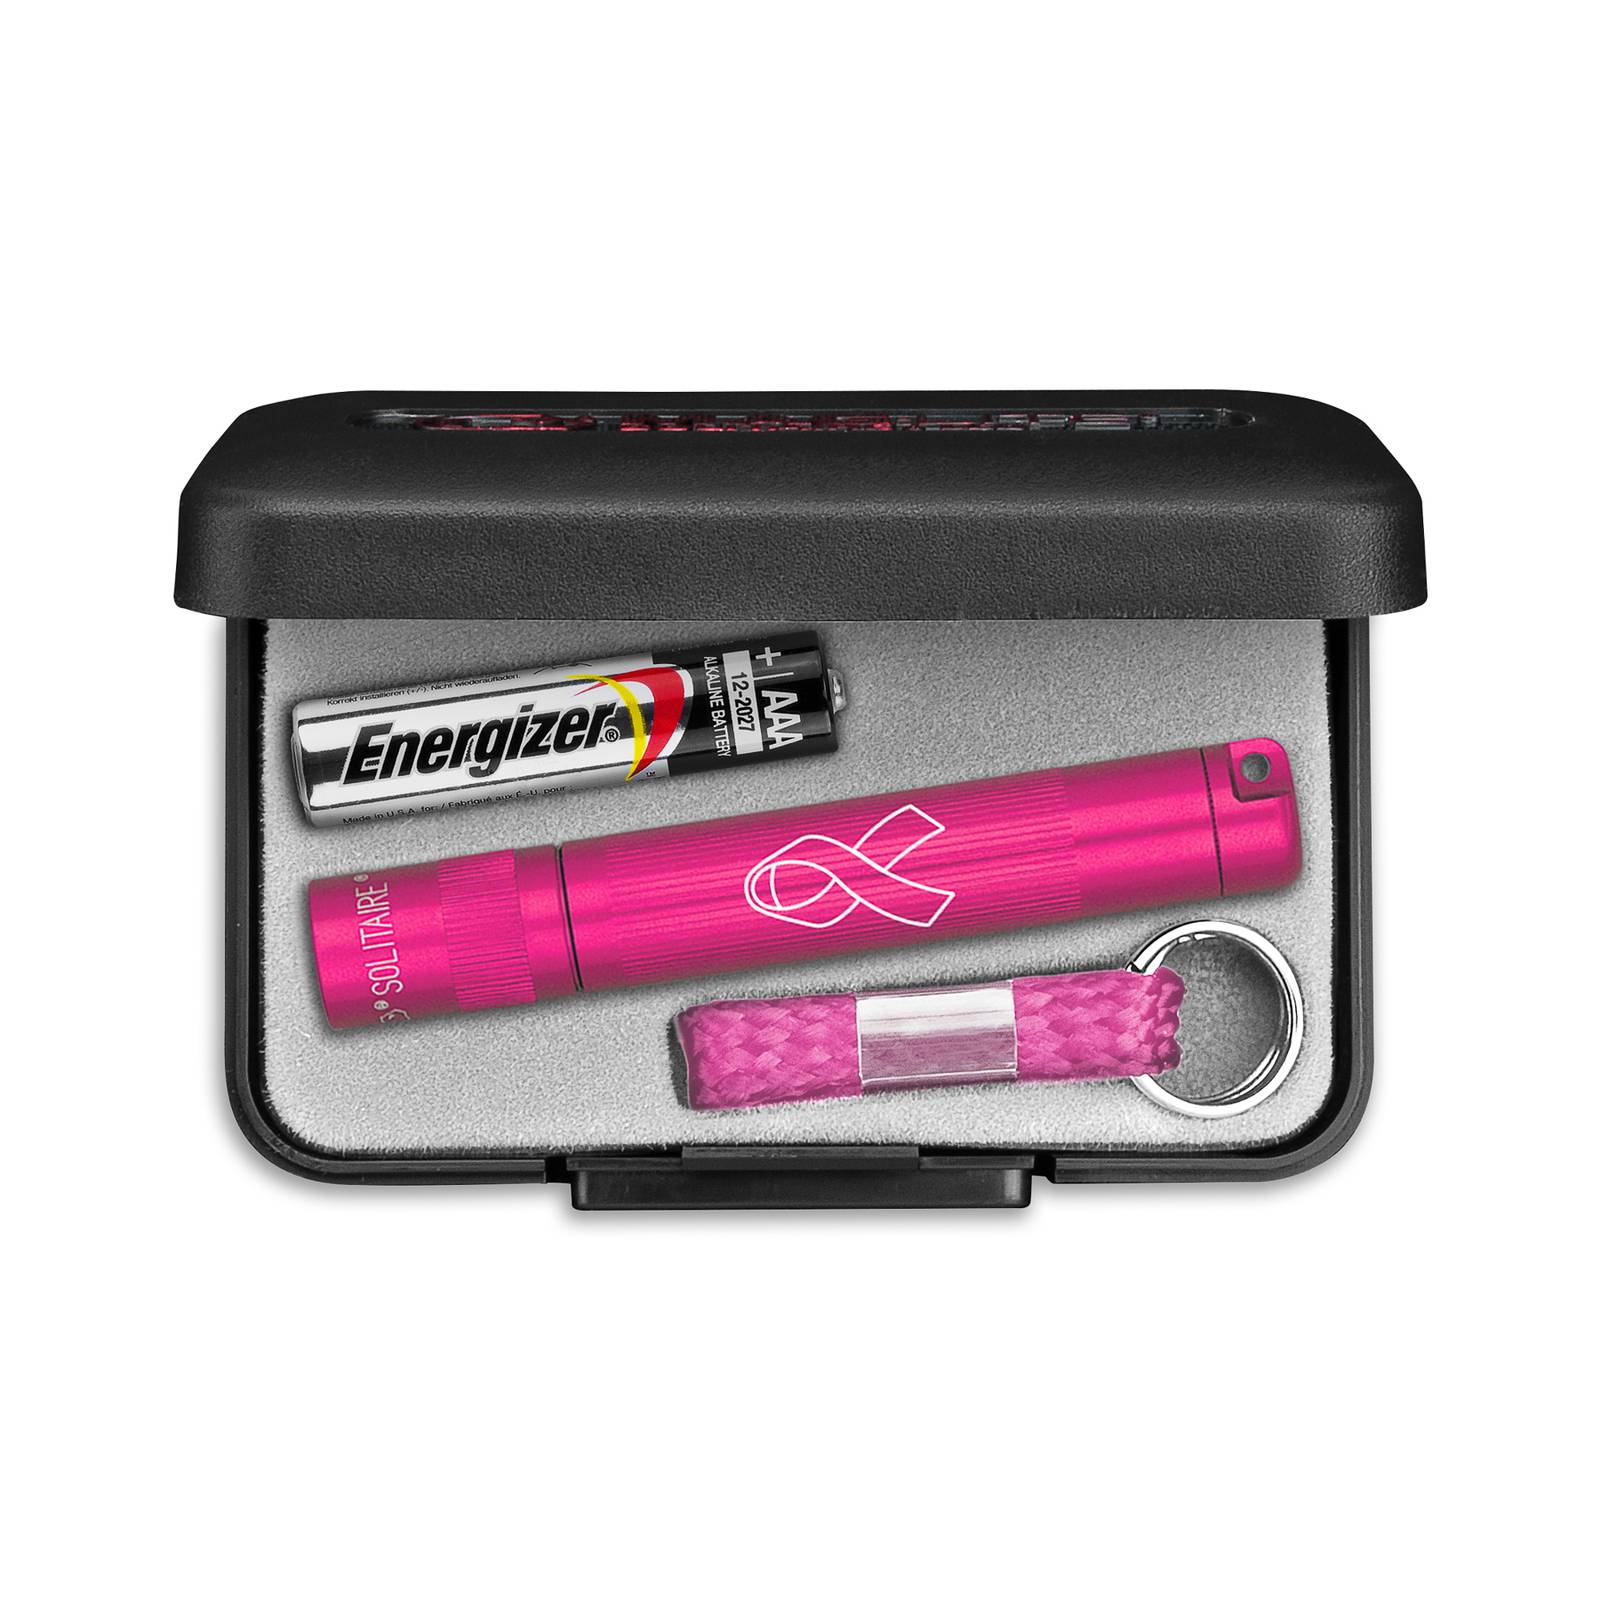 Maglite LED-ficklampa Solitaire, 1-cell AAA, låda, rosa